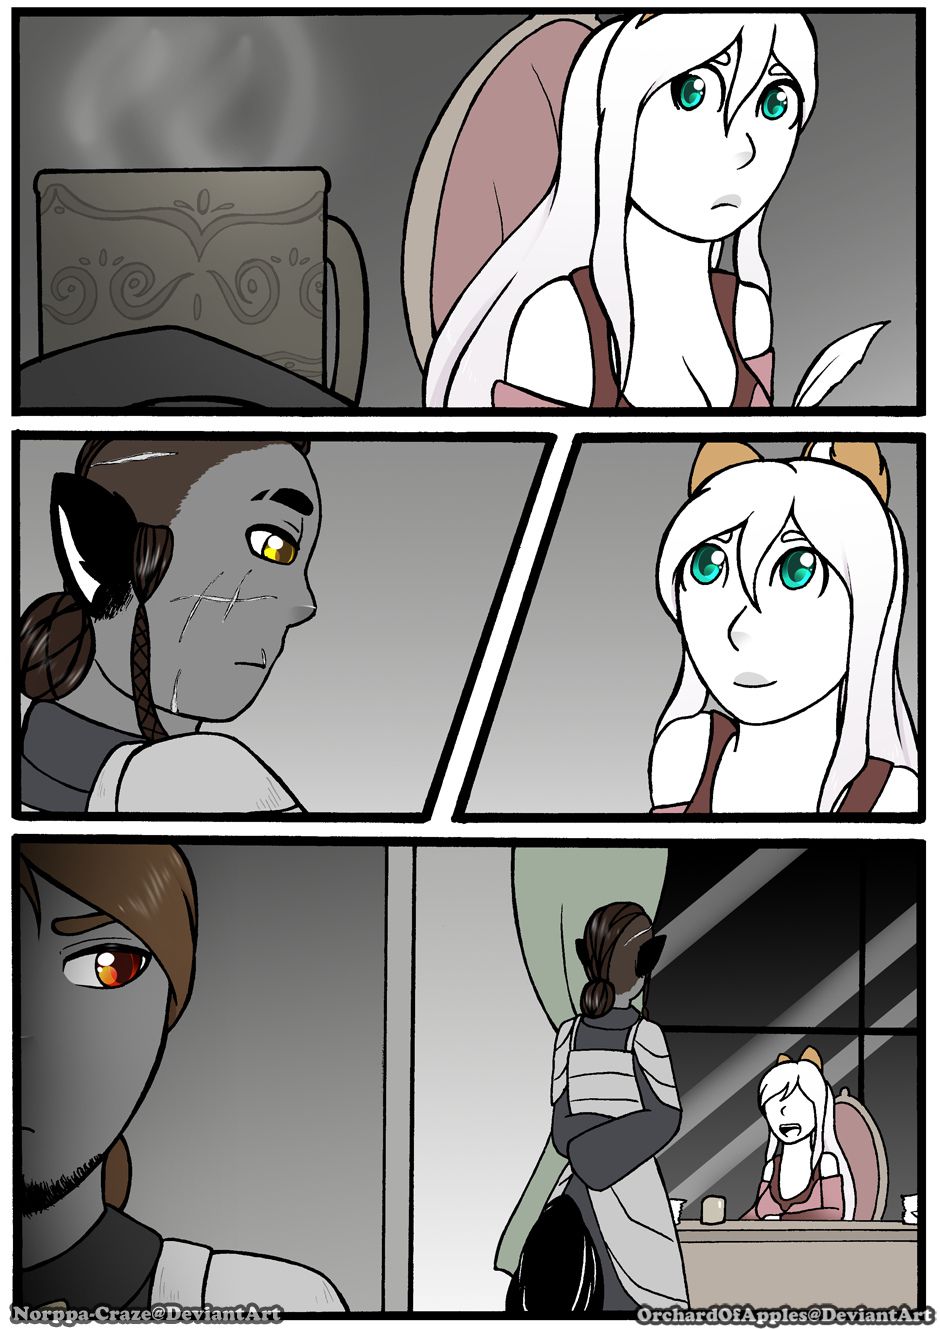 [Jeny-jen94] Between Kings and Queens [Ongoing] 323